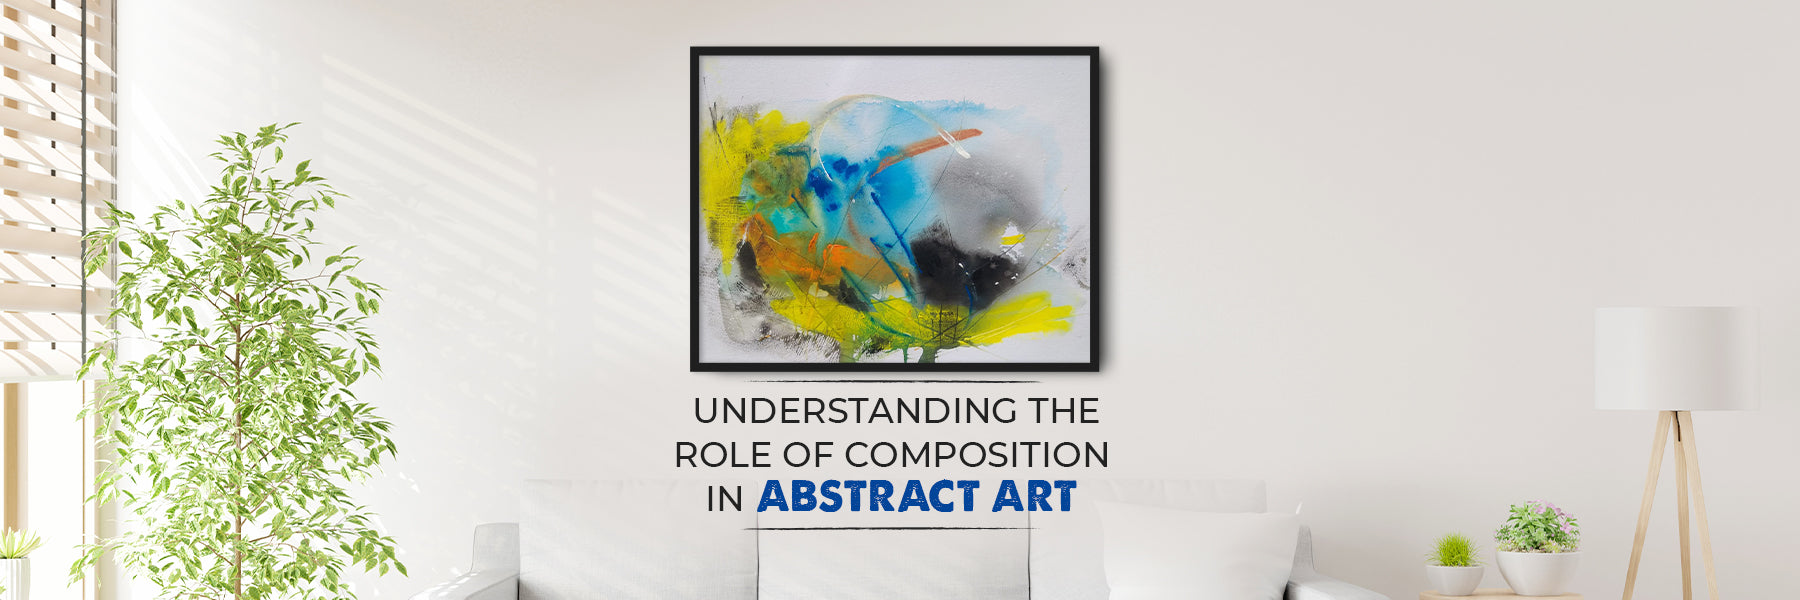 Understanding the Role of Composition in Abstract Art